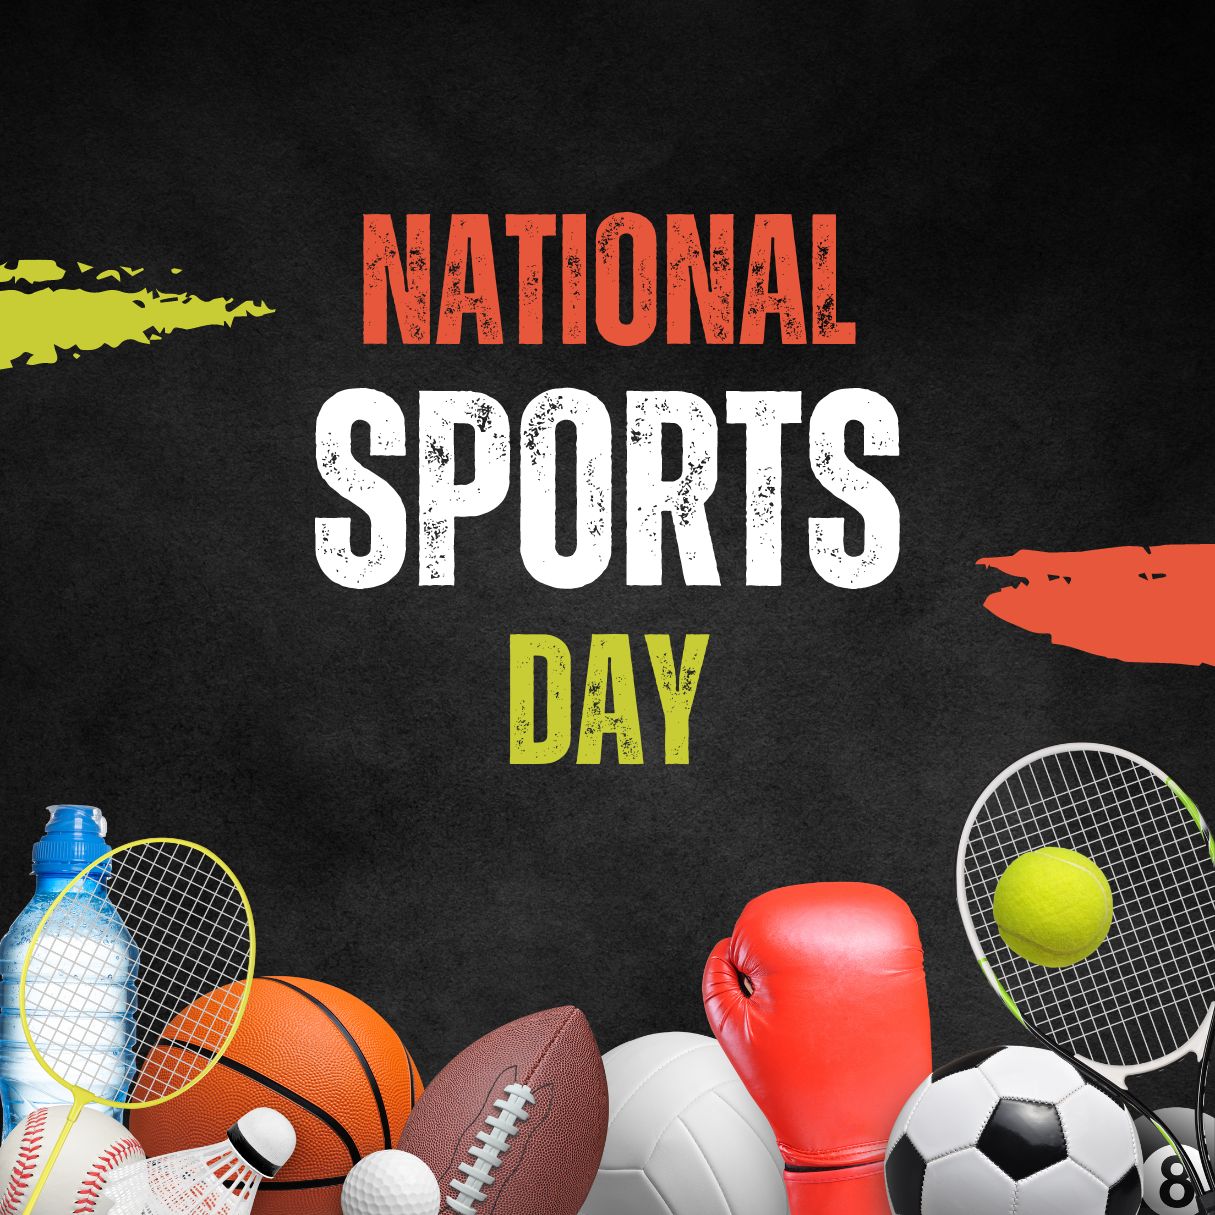 National Sports Day preview image.